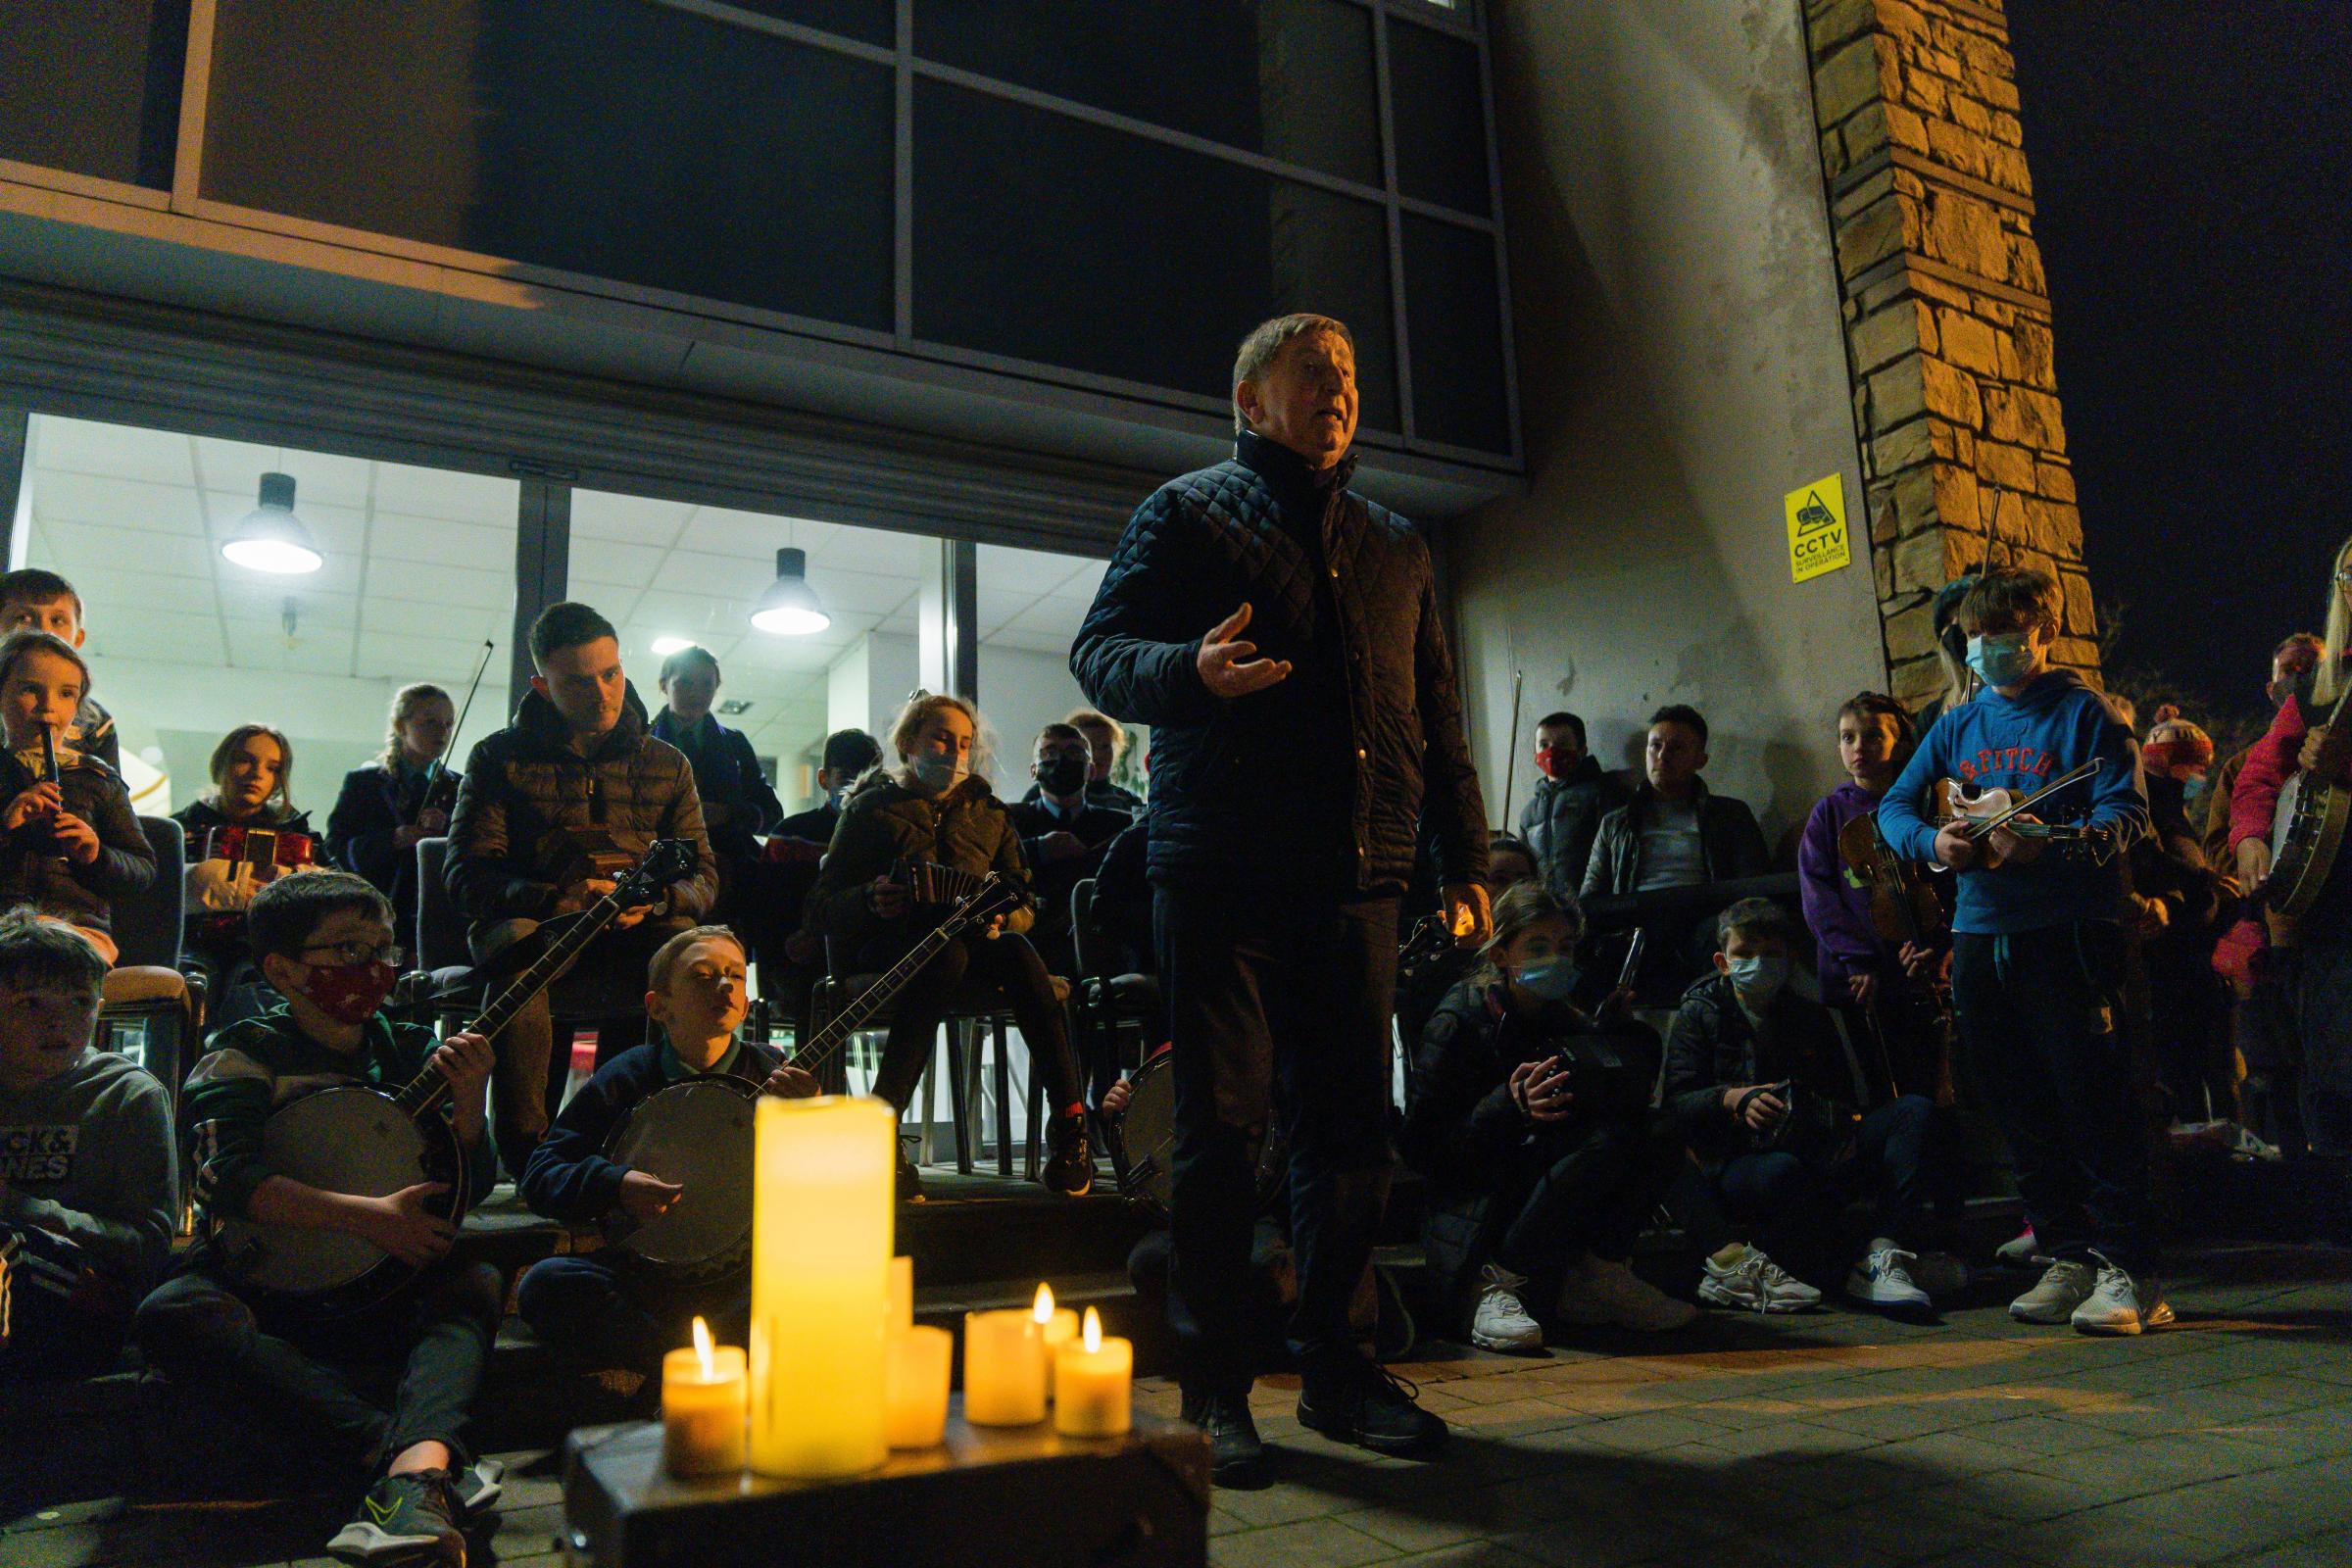 There was a large gathering at Fermanagh House, Enniskillen on Friday 14th January for a candlelit vigil to remember Ashling Murphy who was tragically murdered in Tullamore. Fr Brian DArcy spoke passionately at the vigil where members of Tradacad